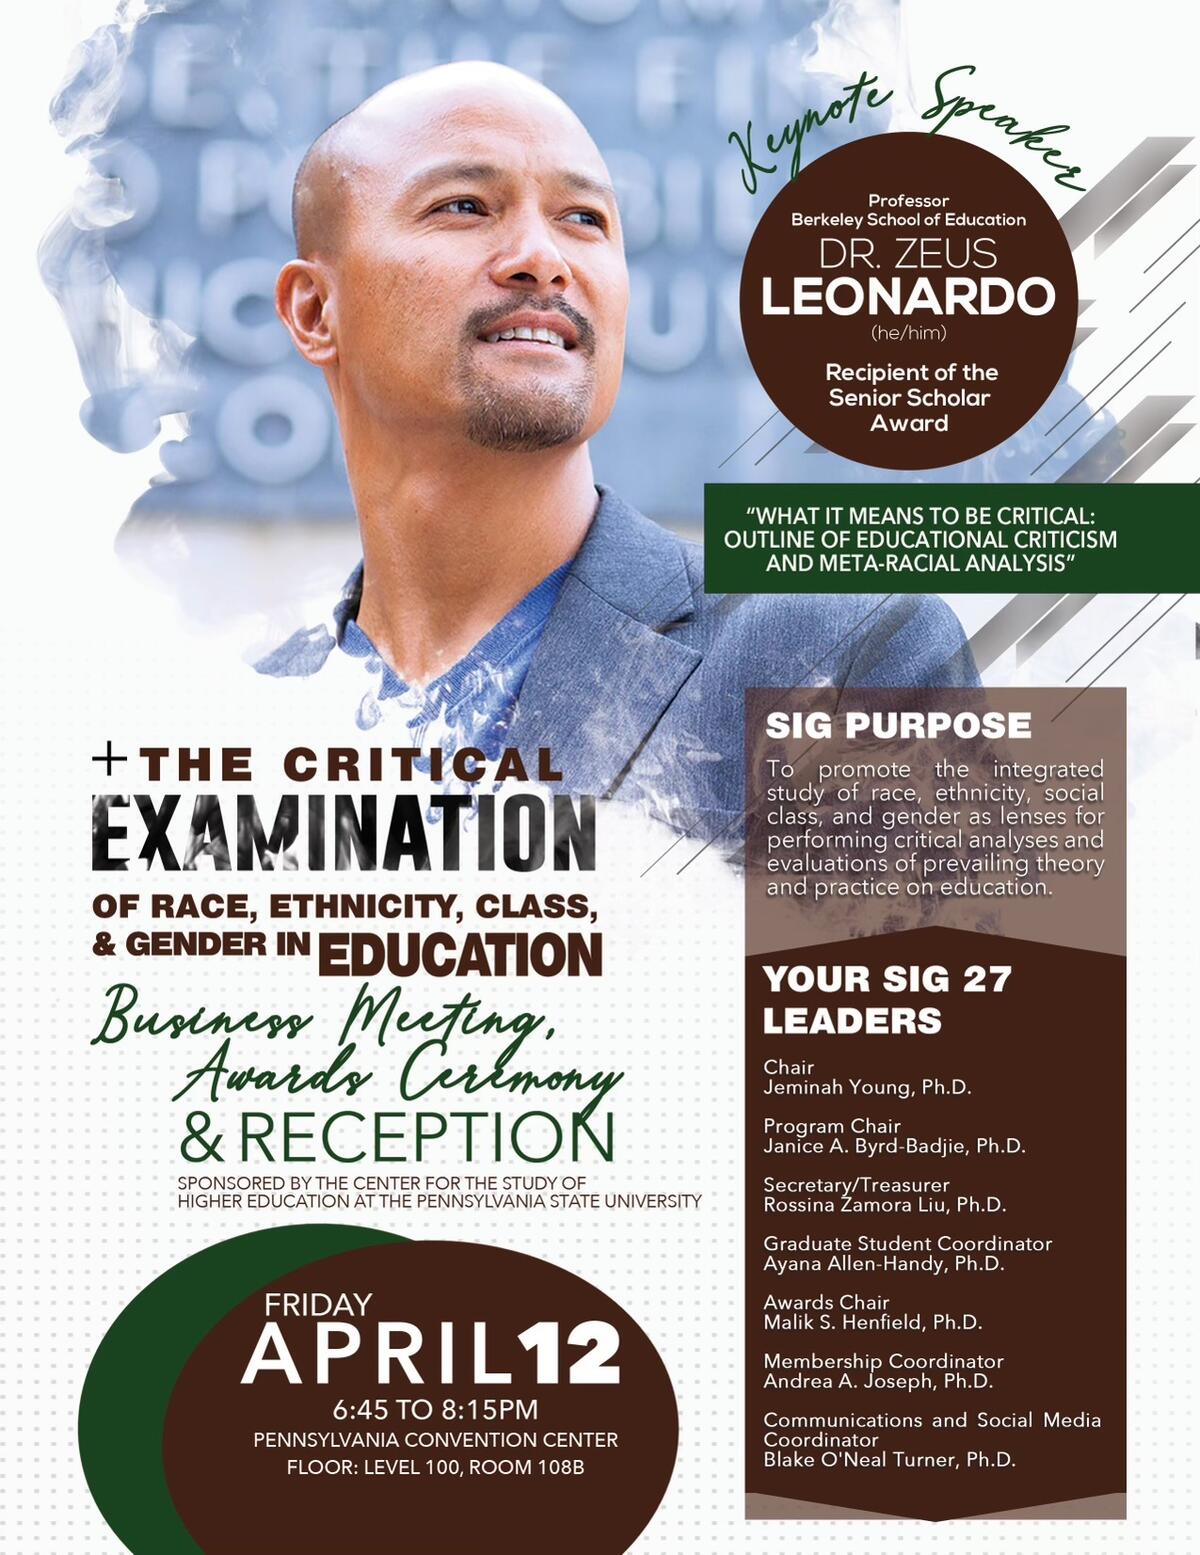 Event flyer for the keynote address to the Critical Examination of Race, Ethnicity, Class, and Gender in Education annual meeting. A picture of Zeus Leonardo, the keynote speaker, is in the top-center. Prominent colors are white, brown, blue, and green.